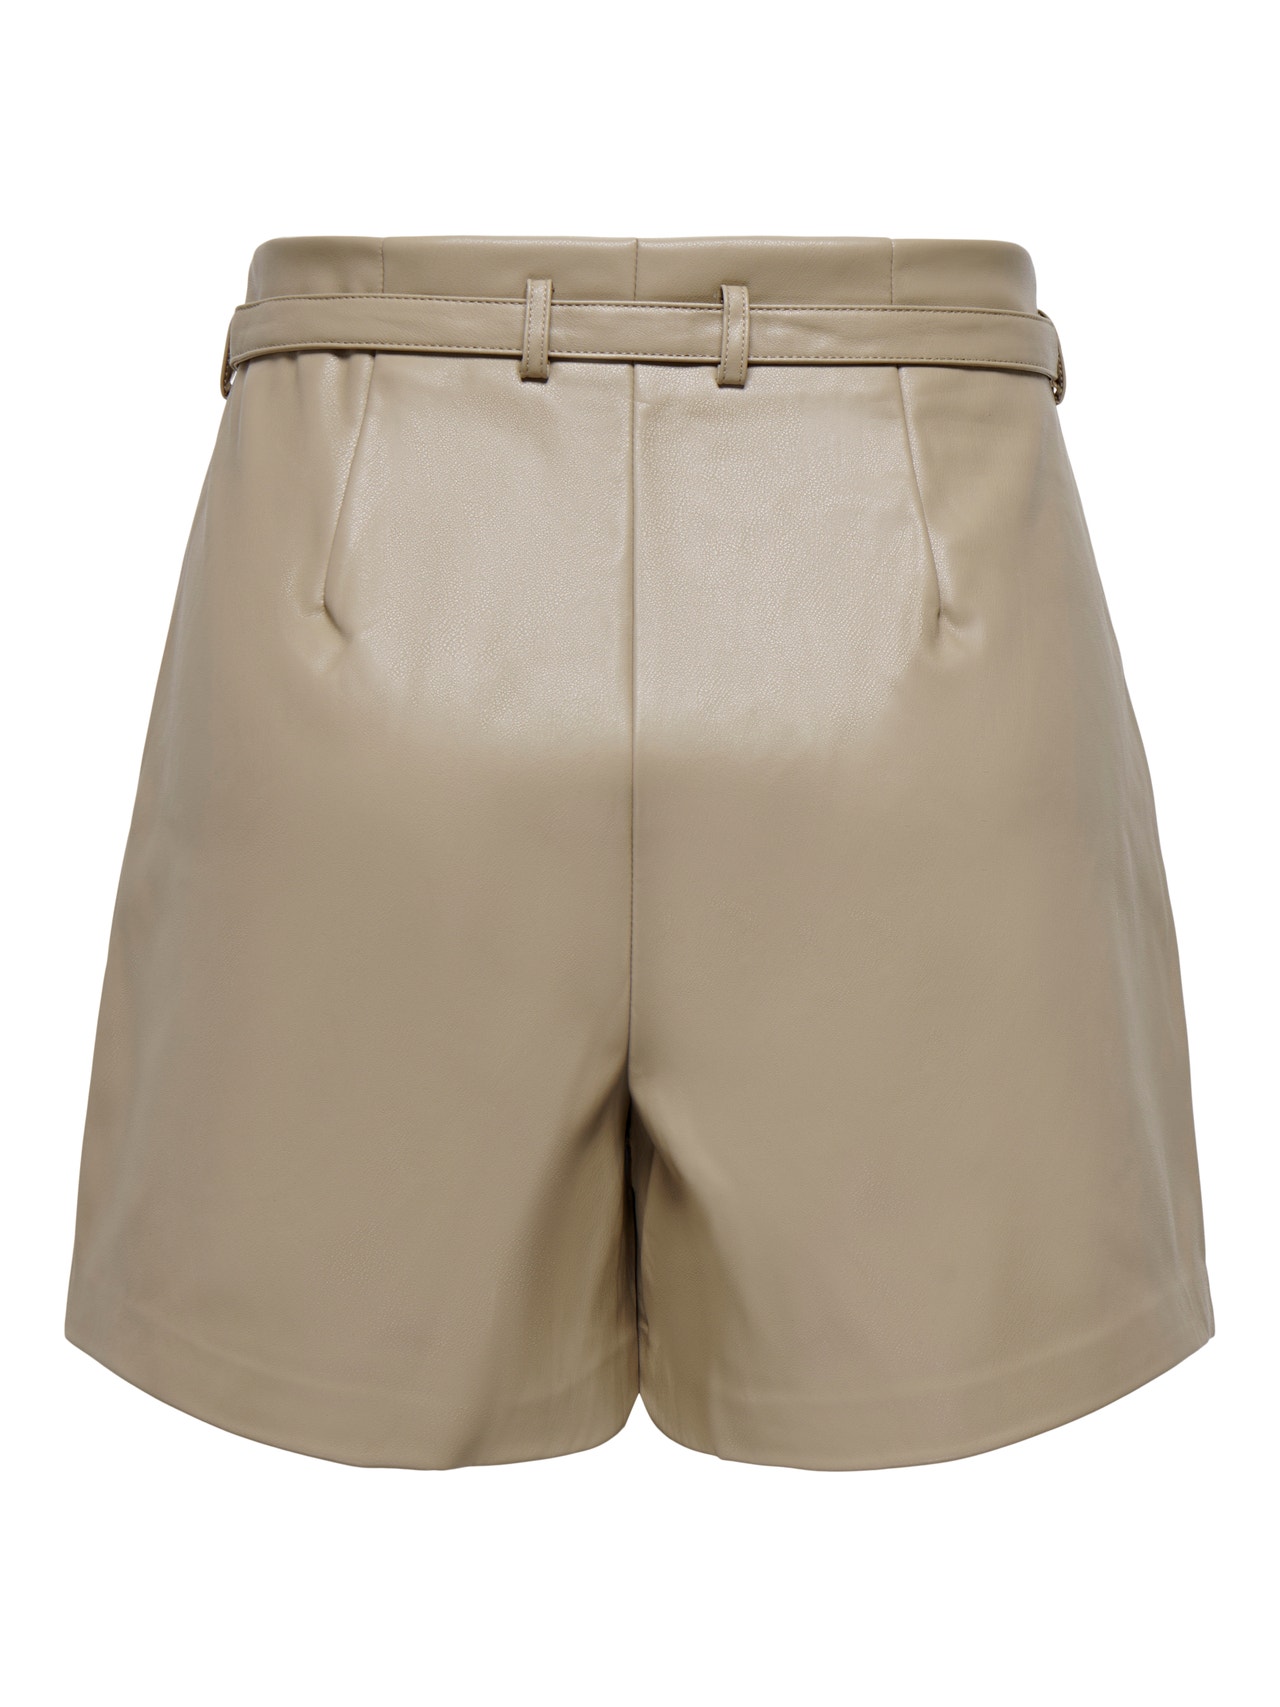 ONLY Faux leather shorts -Weathered Teak - 15275421